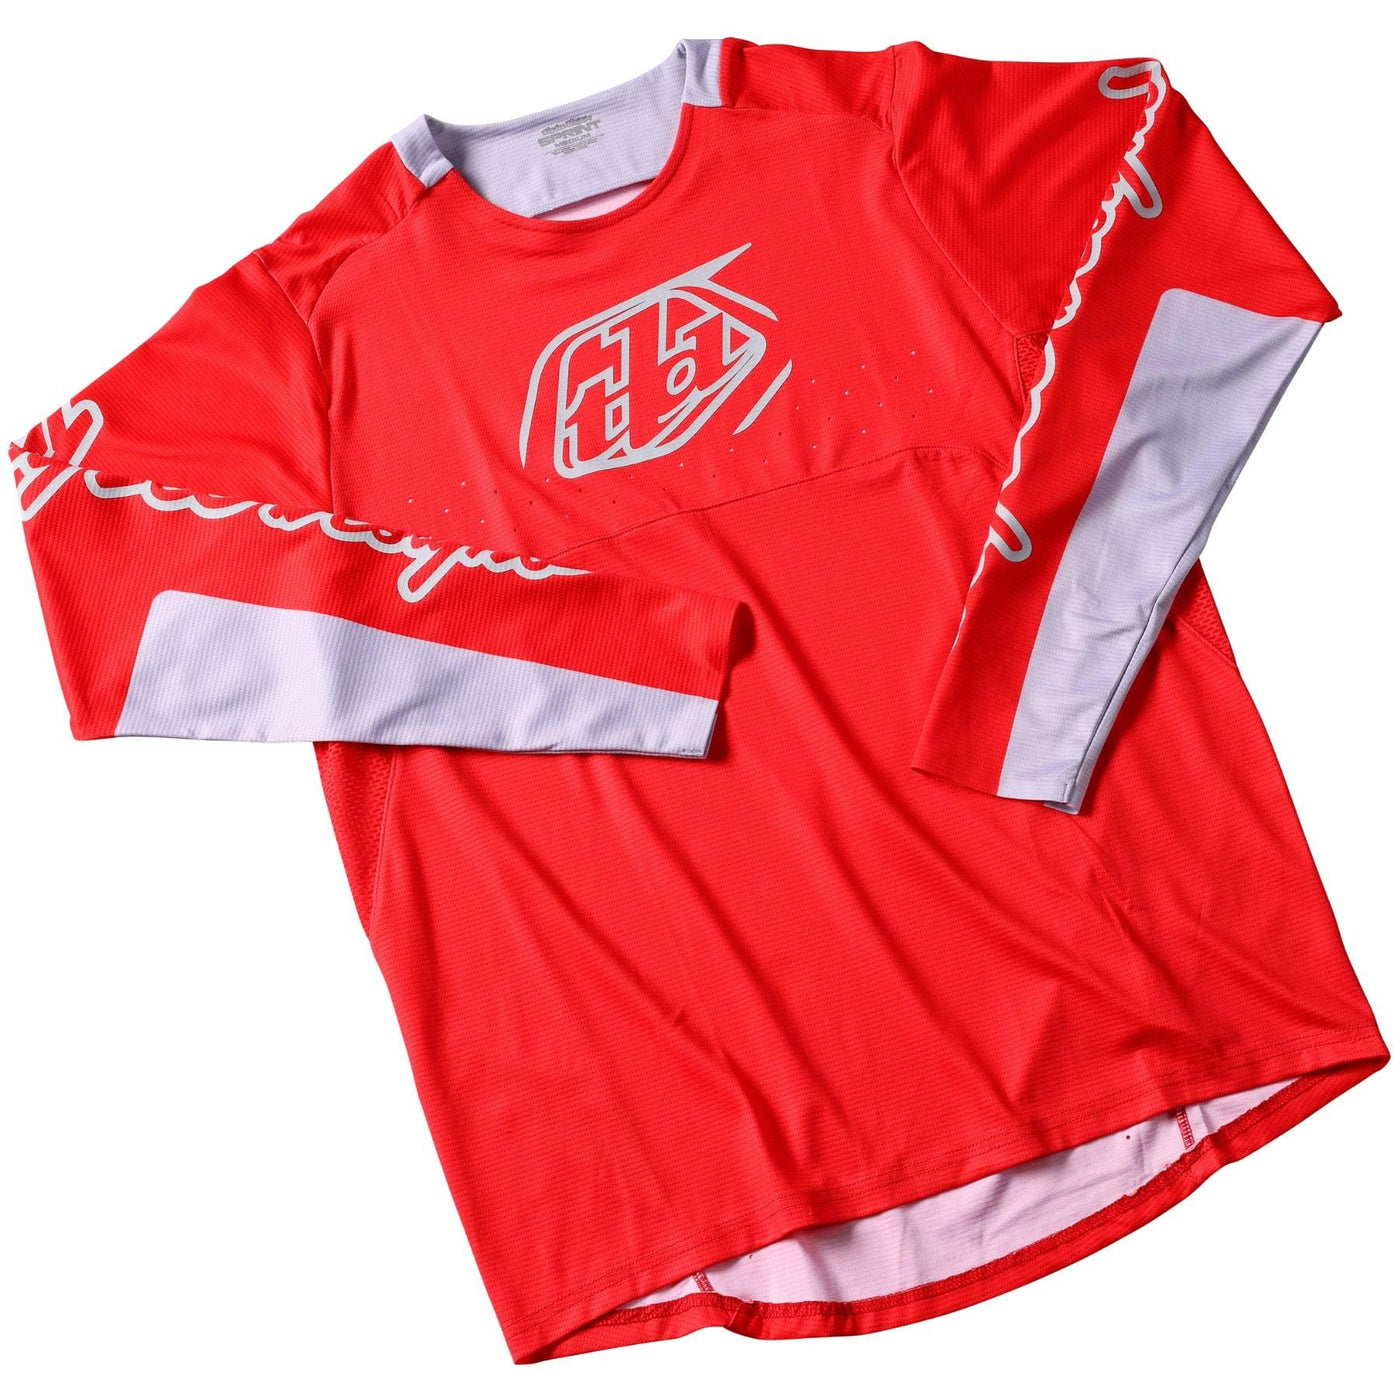 Troy Lee Designs Sprint Jersey Icon - Race Red